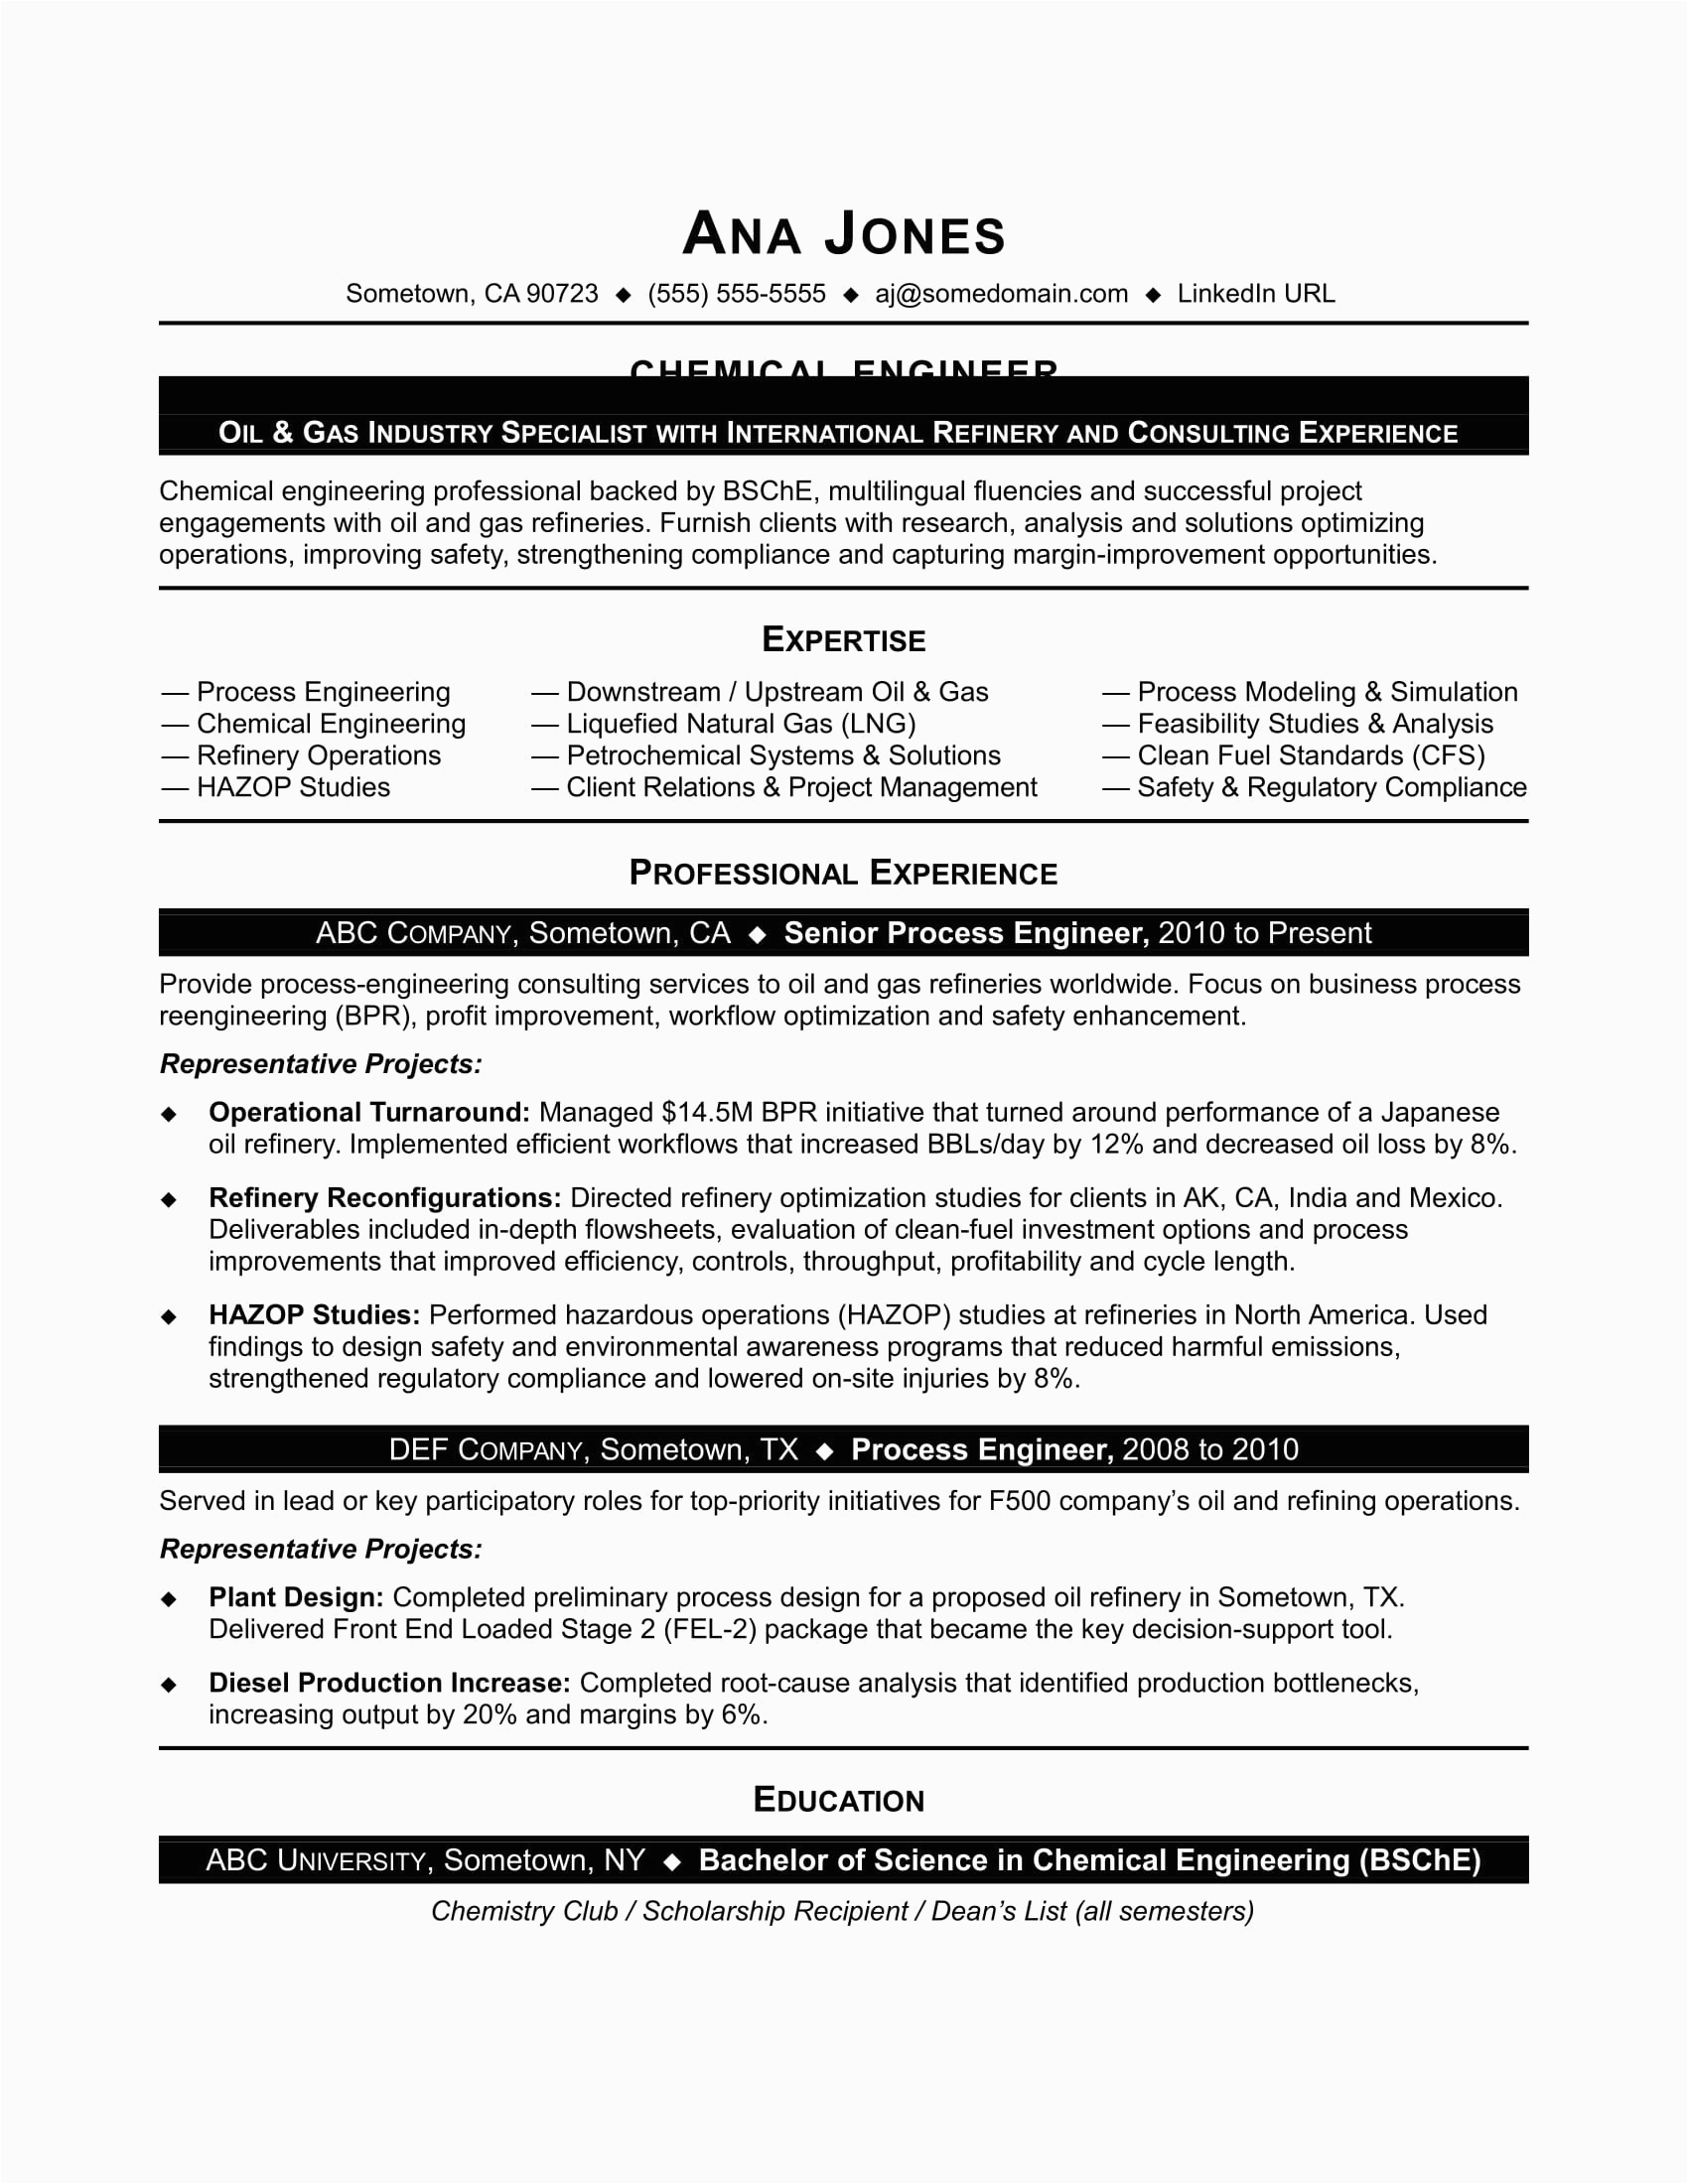 Sample Resume for Oil and Gas Entry Level Planning Engineer Cv Oil and Gas April 2021